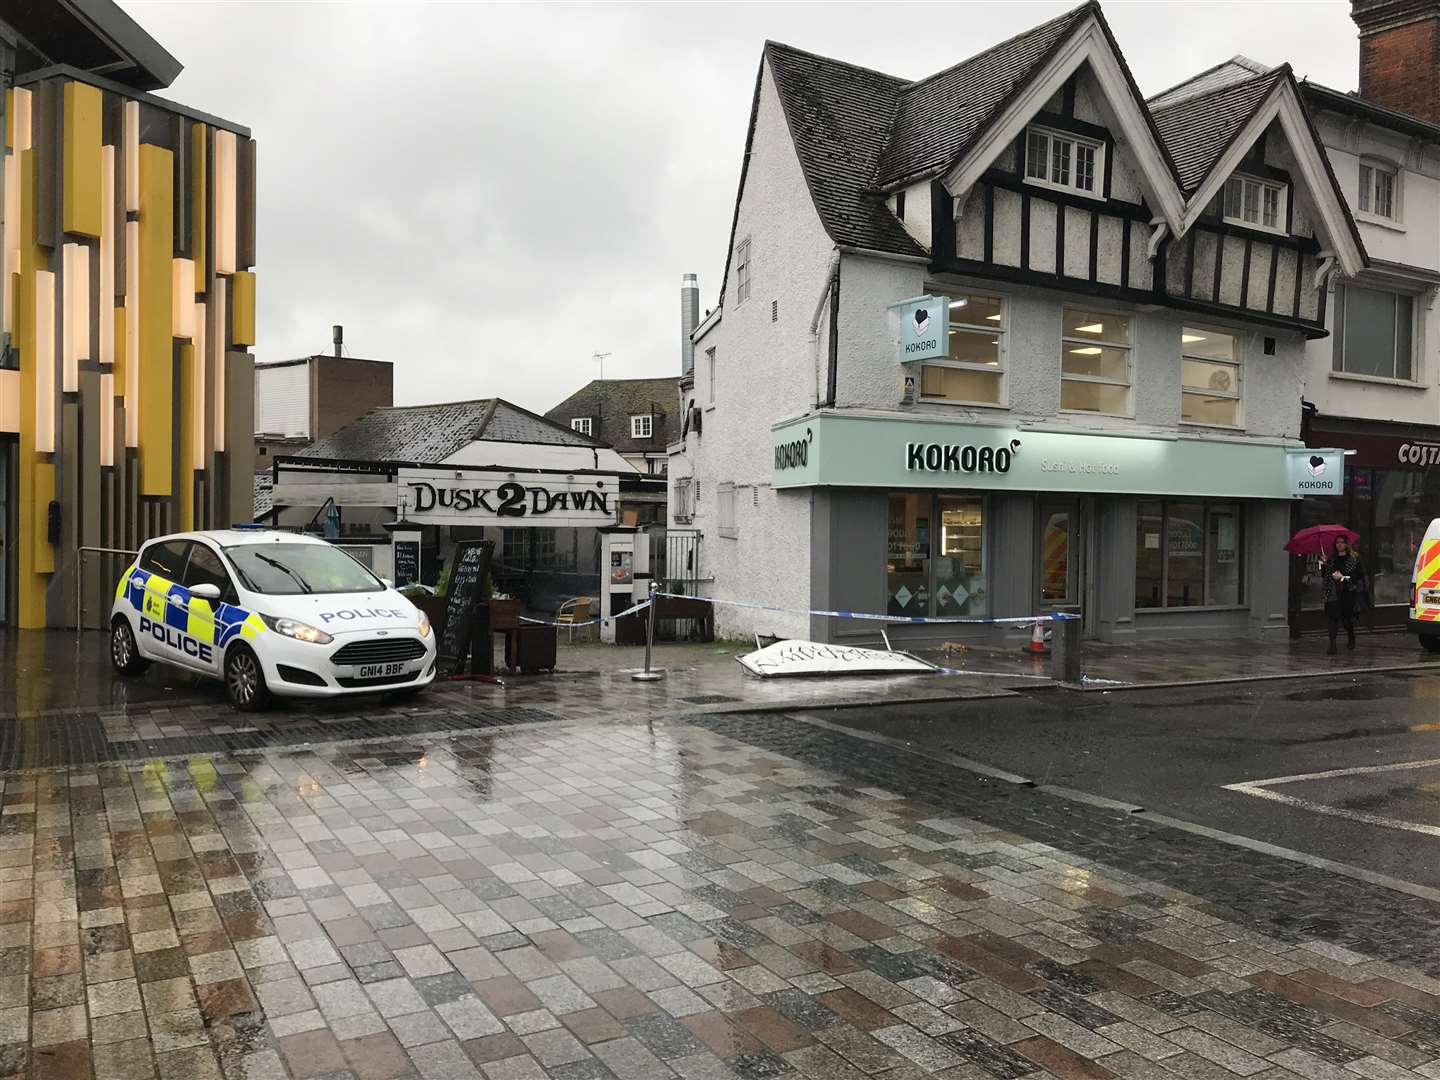 Police outside Dusk 2 Dawn in King Street, Maidstone, after two men were stabbed in September 2018